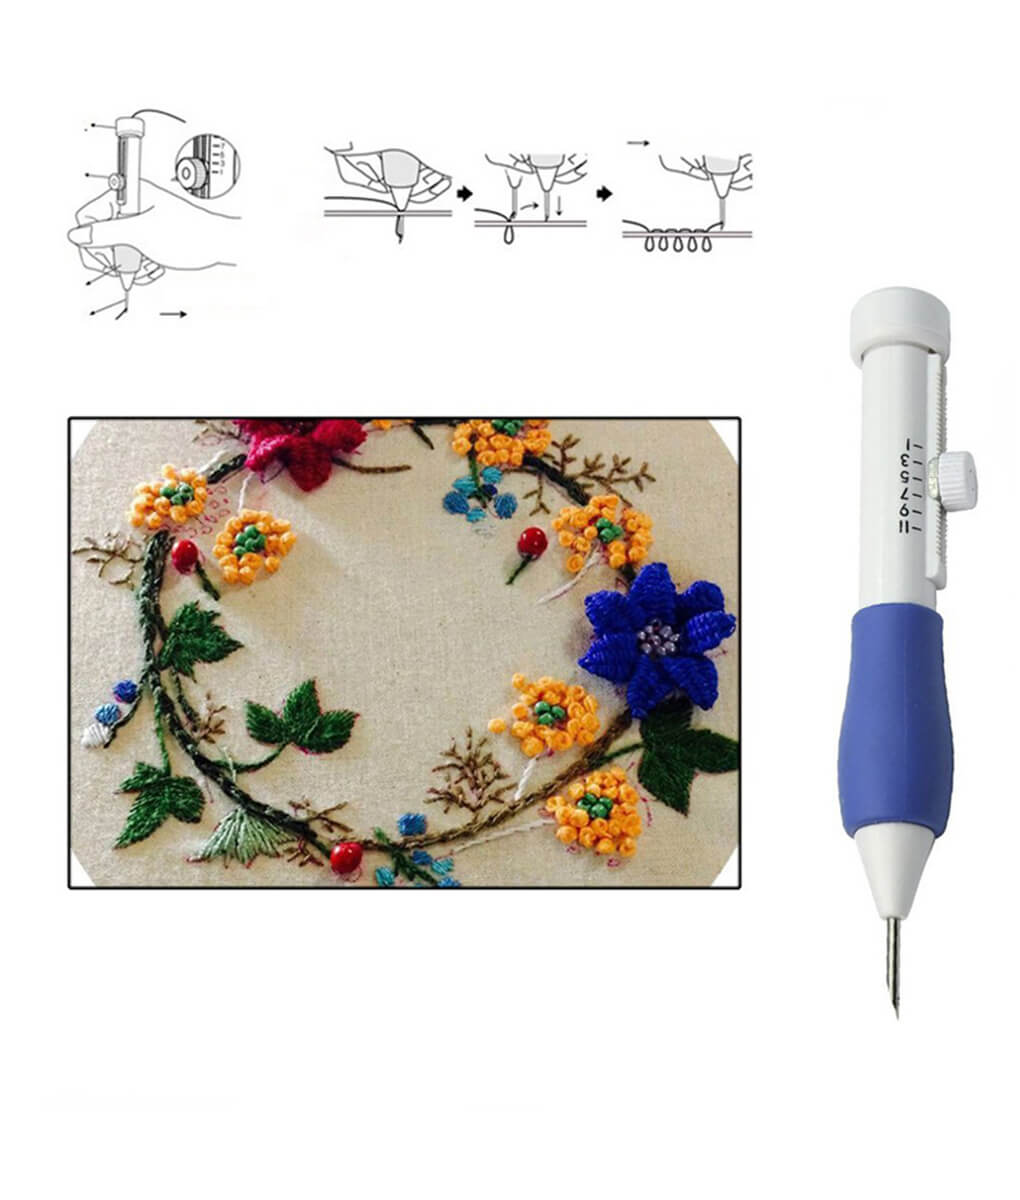 Embroidery Pen Needle SET Magic Flower Stitch Punch Tools DIY Craft Sewing F6Z1